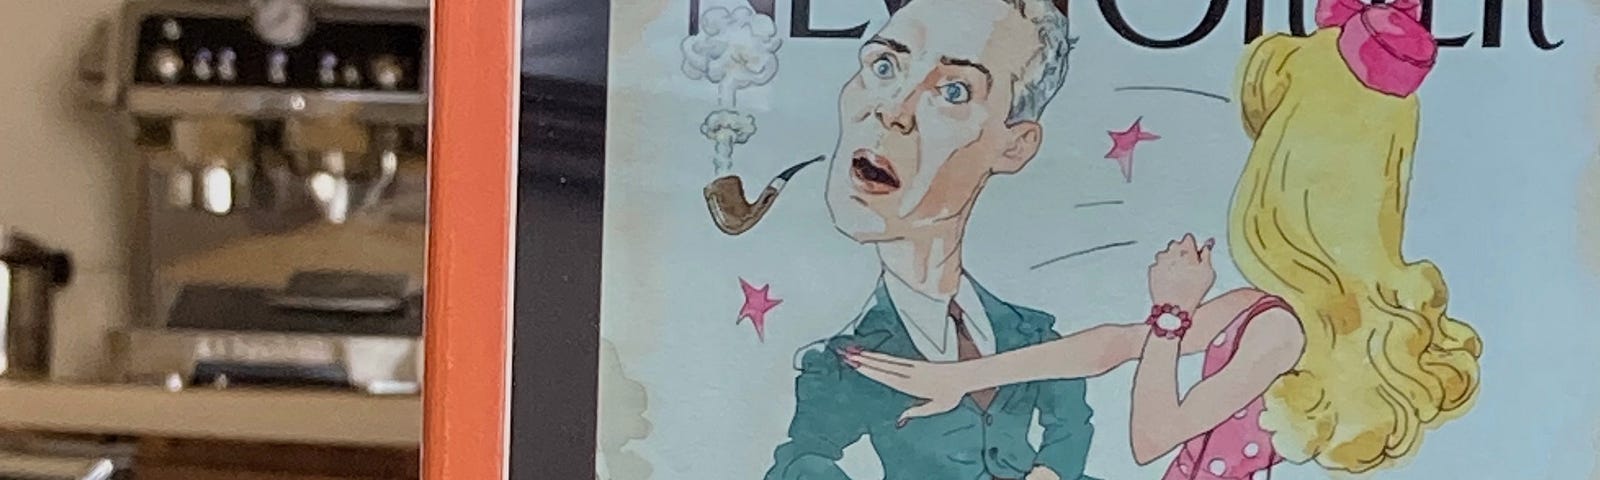 Author photo of iPad shown from kitchen table with image The New Yorker “Slappenheimer” cartoon cover of Barbie slapping Oppenheimer, knocking his pipe out of his mouth, and sending his hat flying off his head.